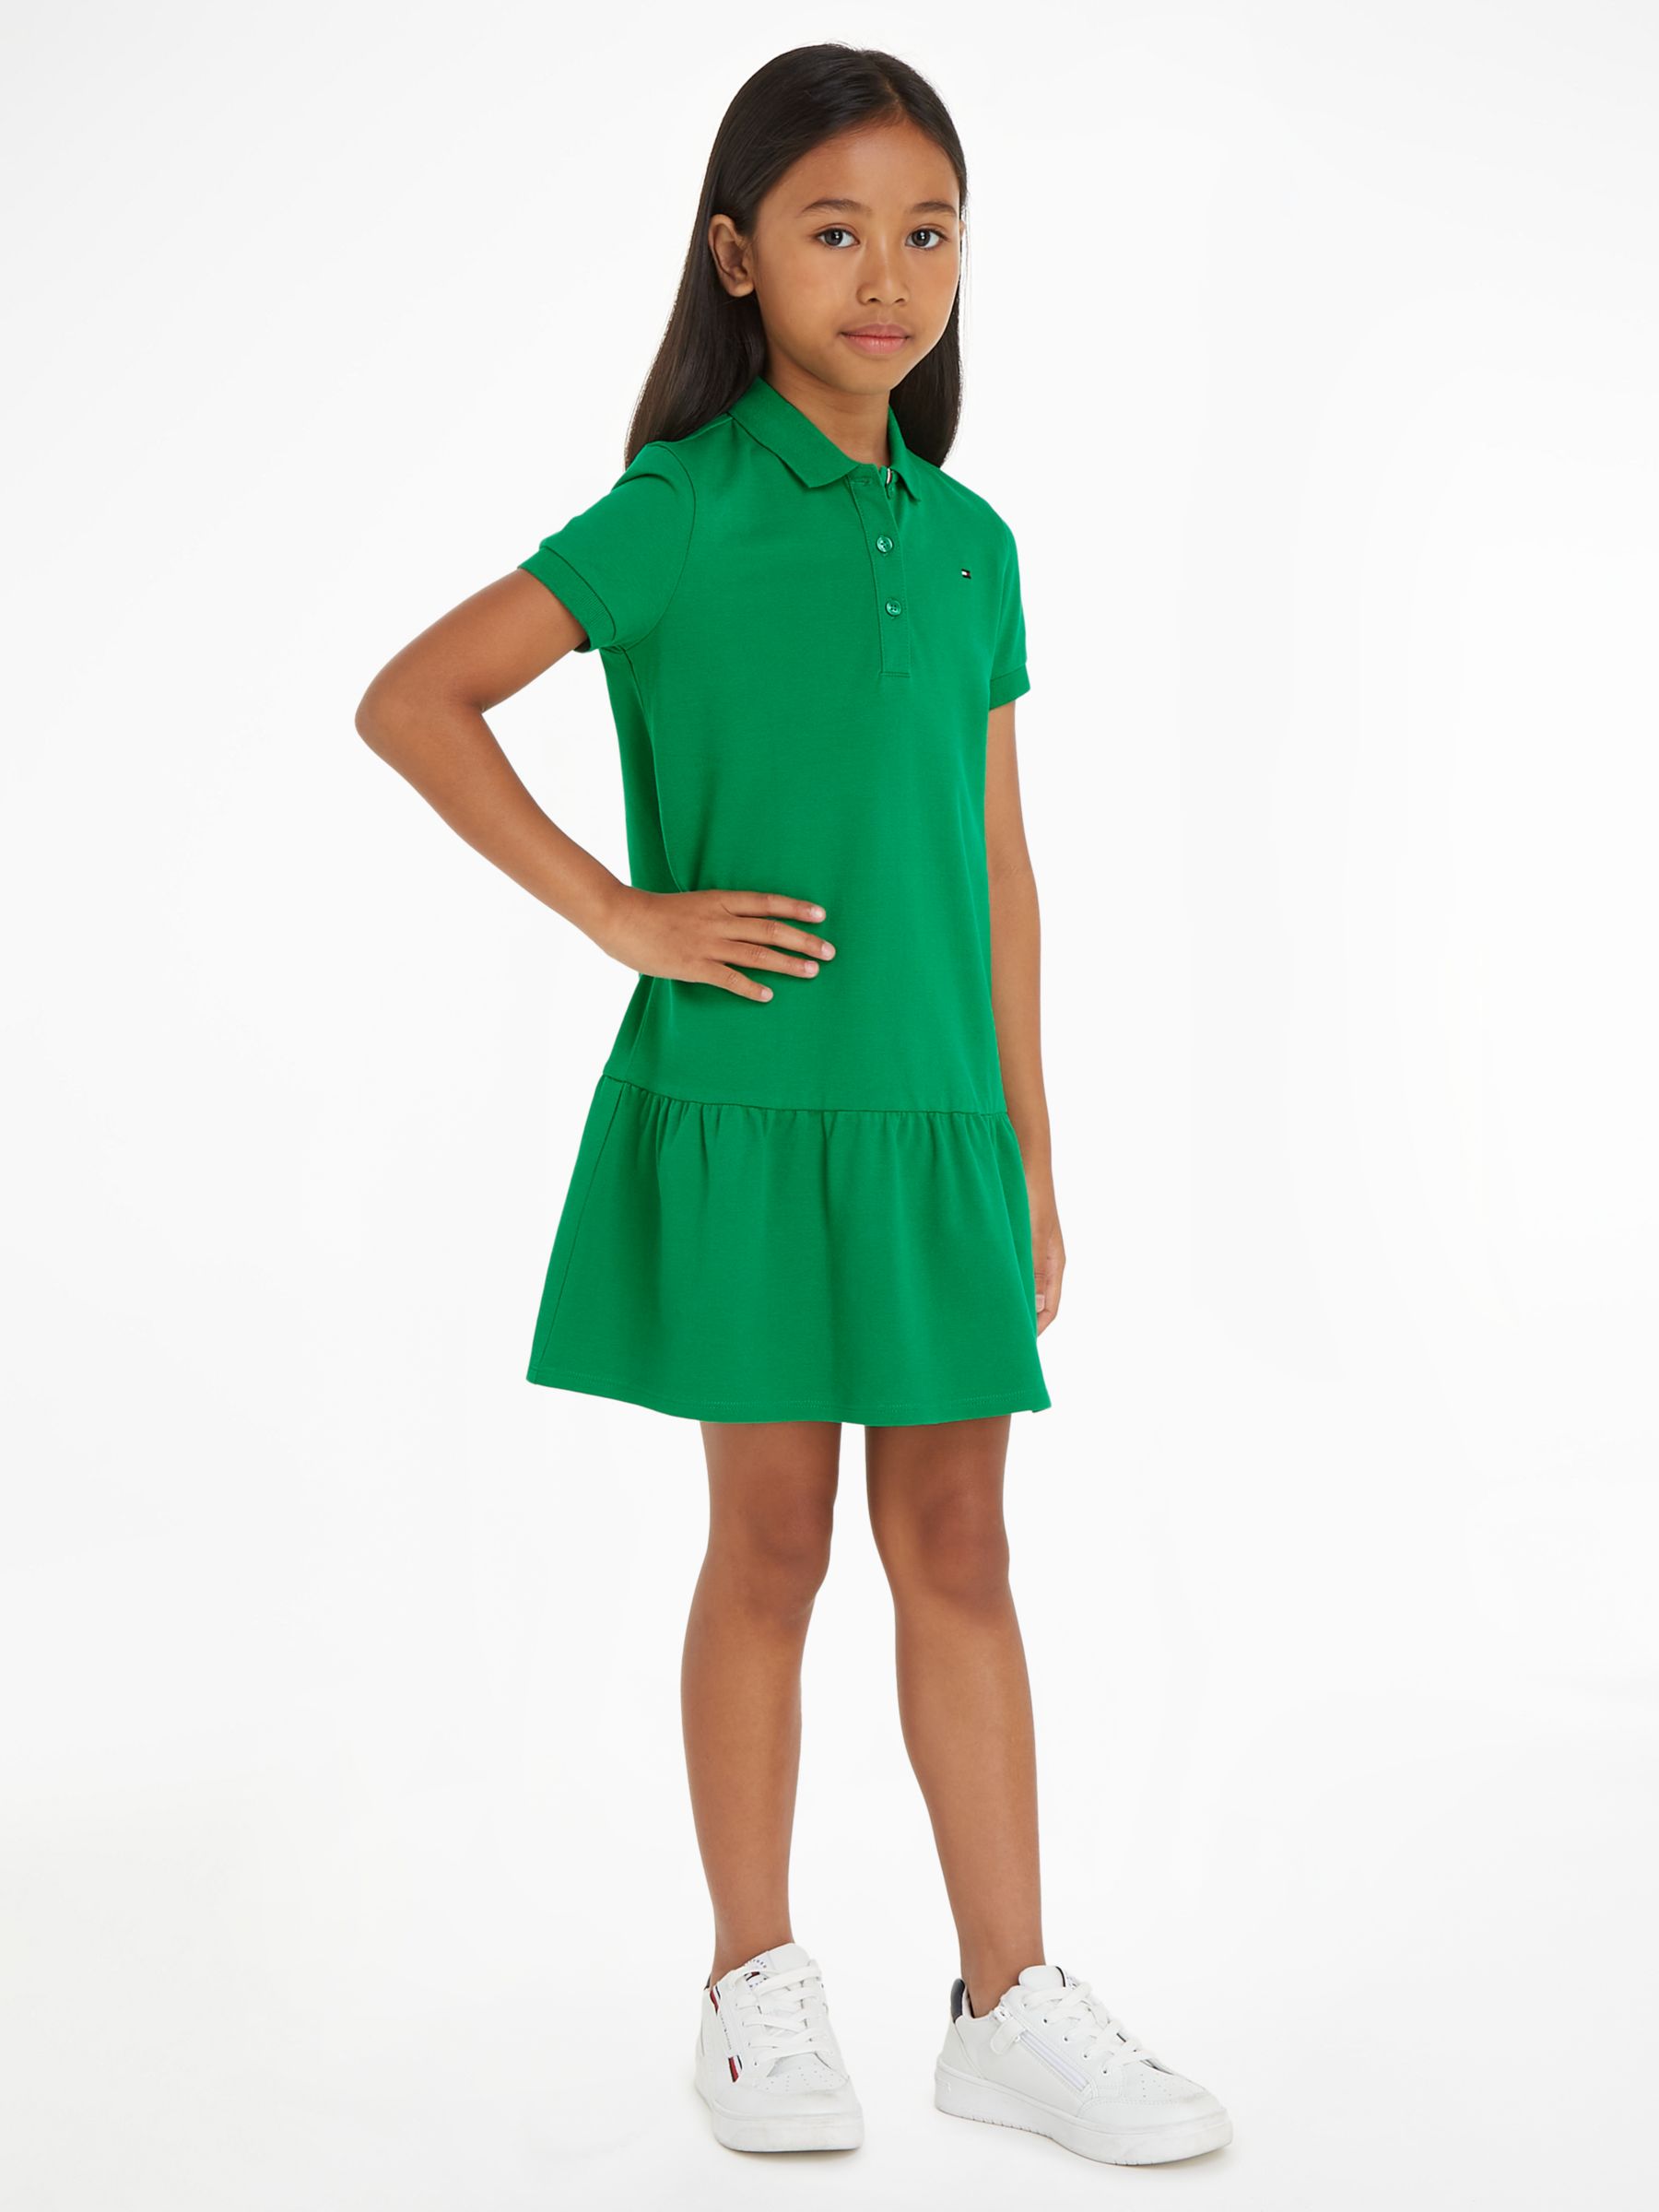 Buy Tommy Hilfiger Kids' Essential Flag Polo Dress, Olympic Green Online at johnlewis.com